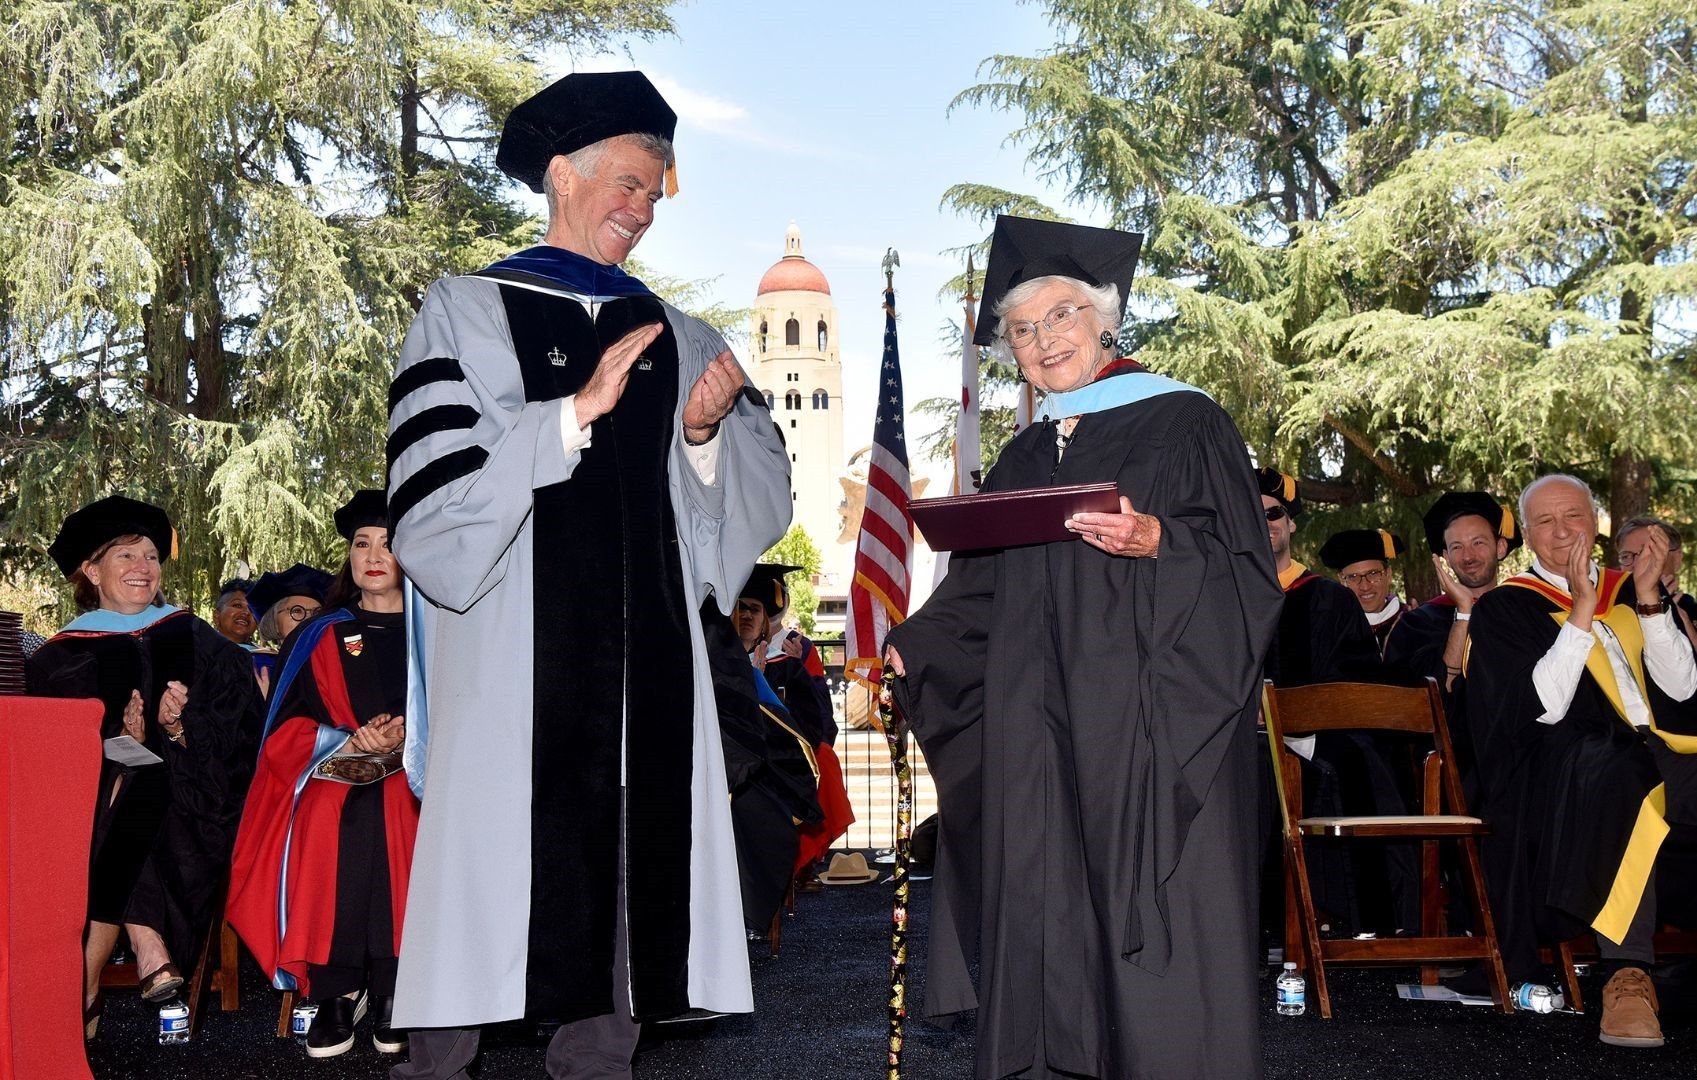 105-year-old woman finishes Stanford University Master's degree after over 80 years